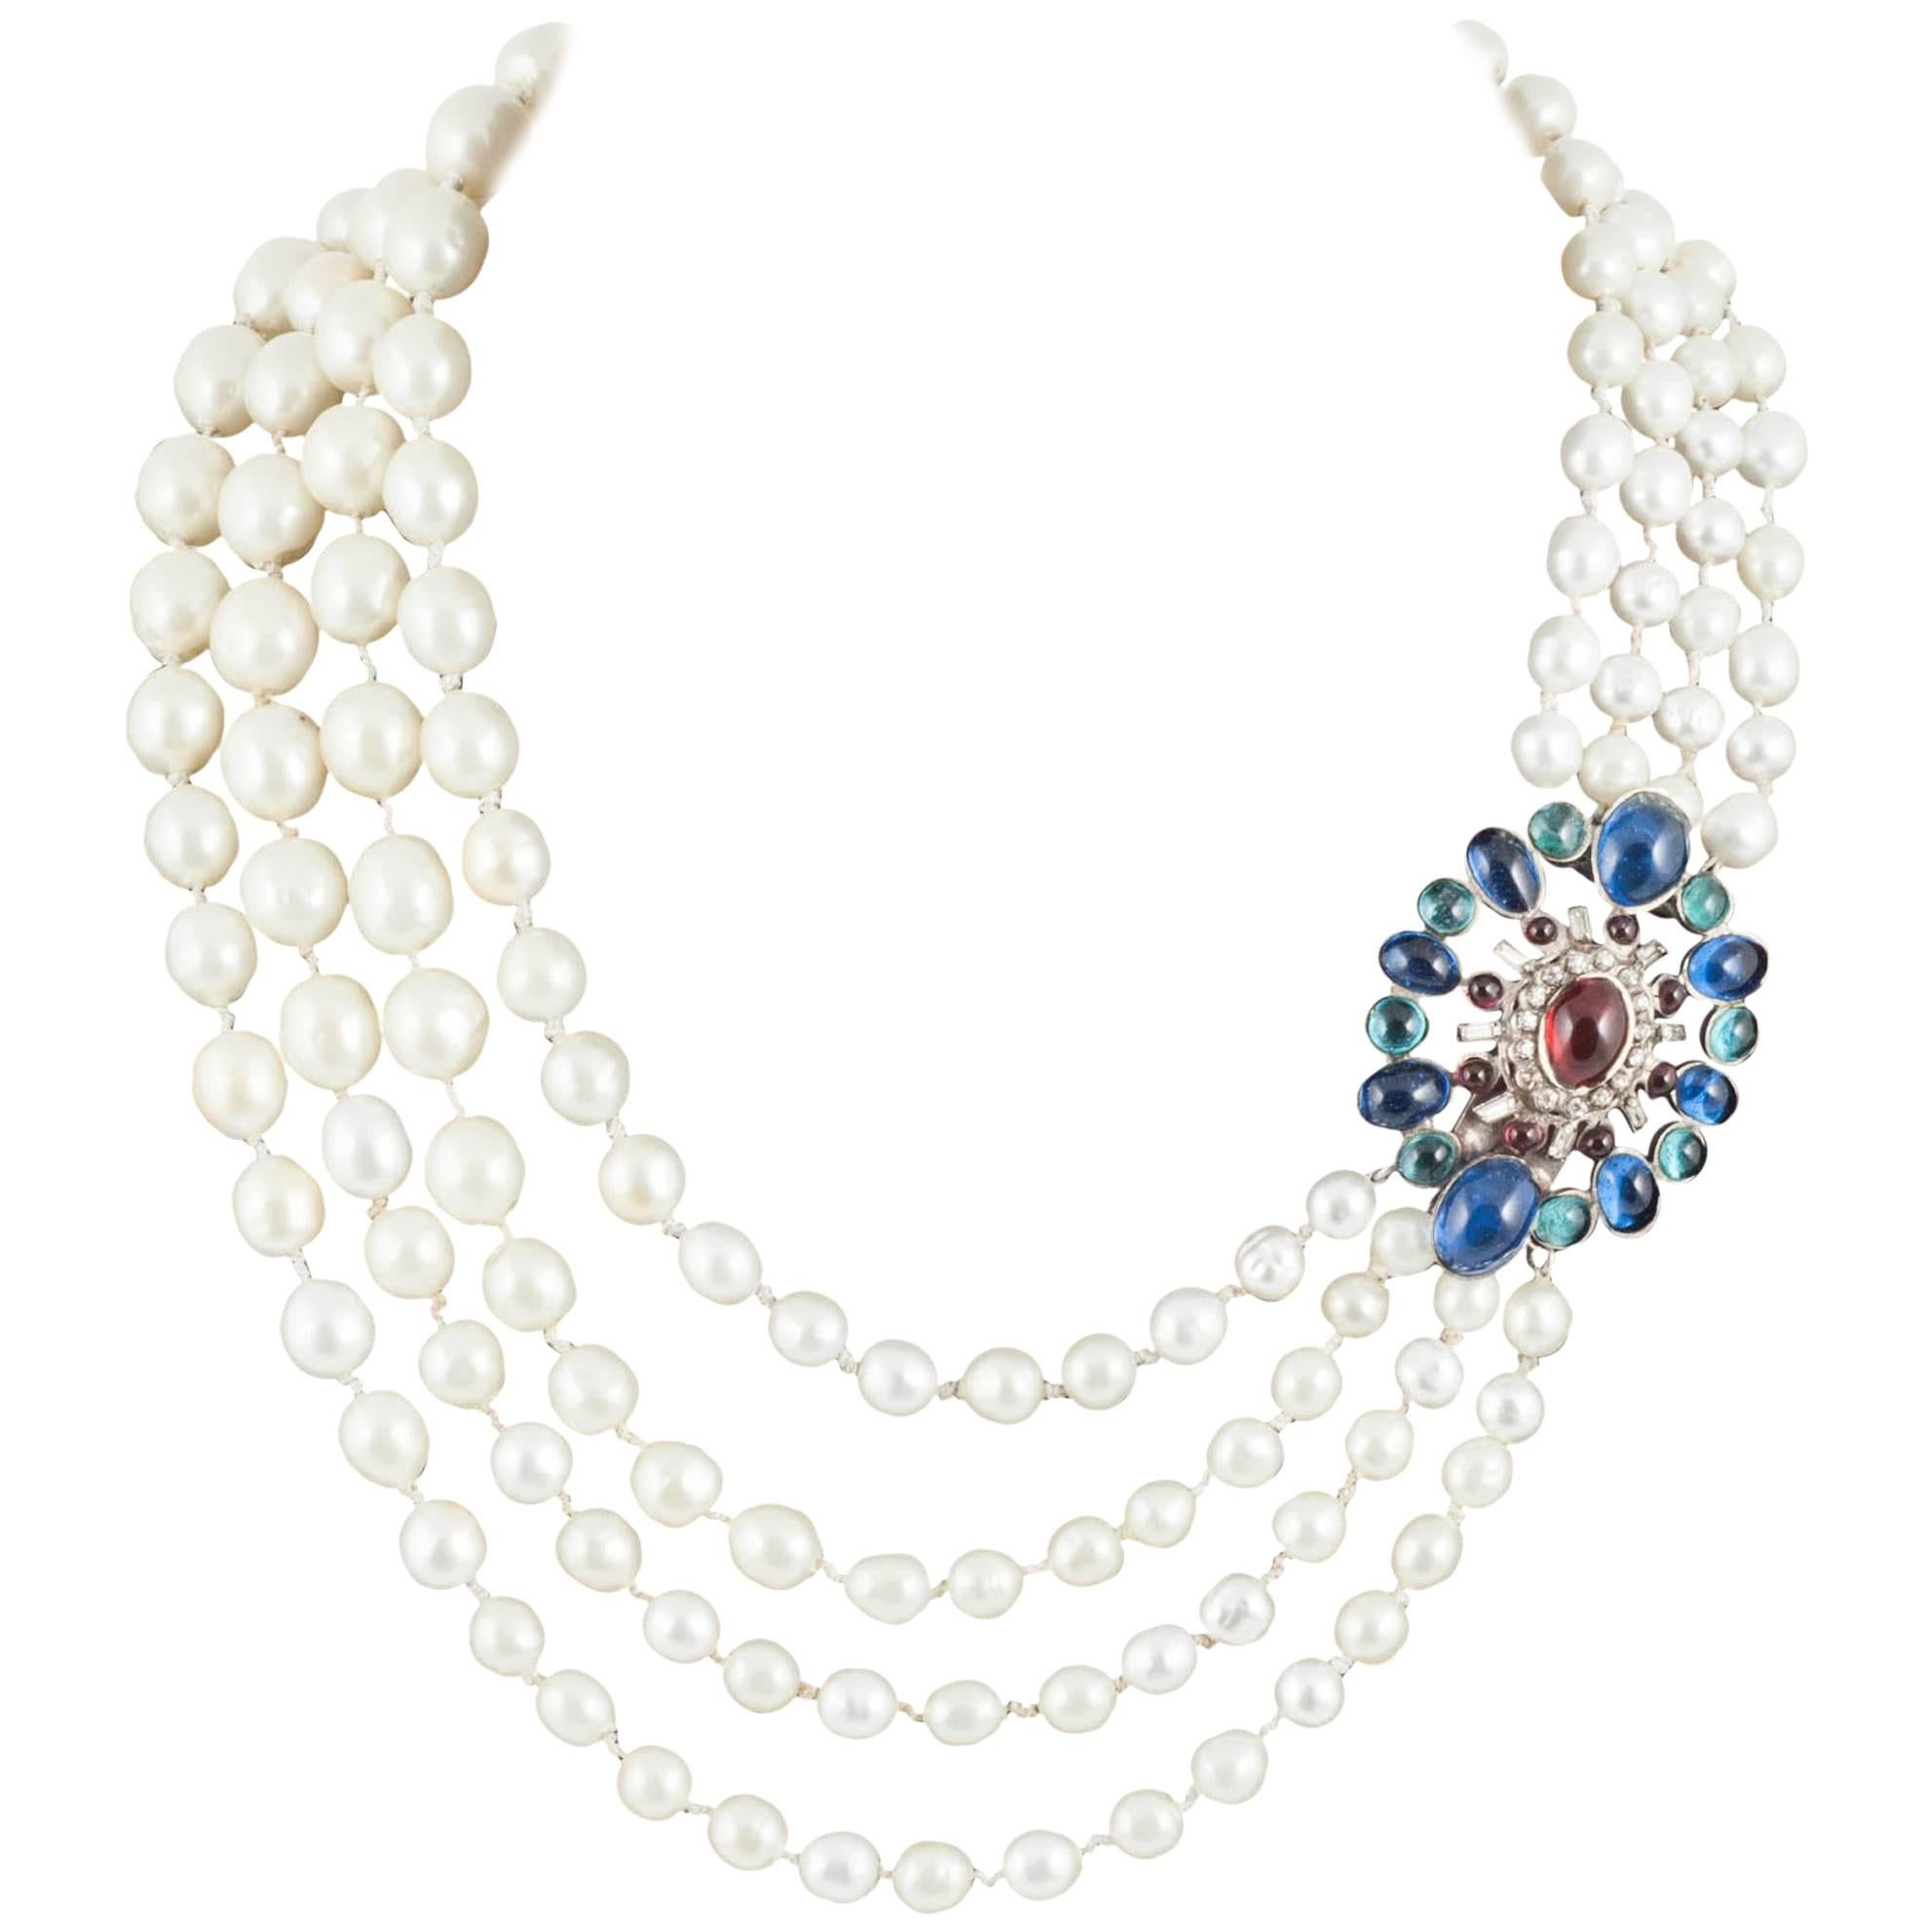 Chanel multi row baroque pearl necklace, with large poured glass clasp, 1960